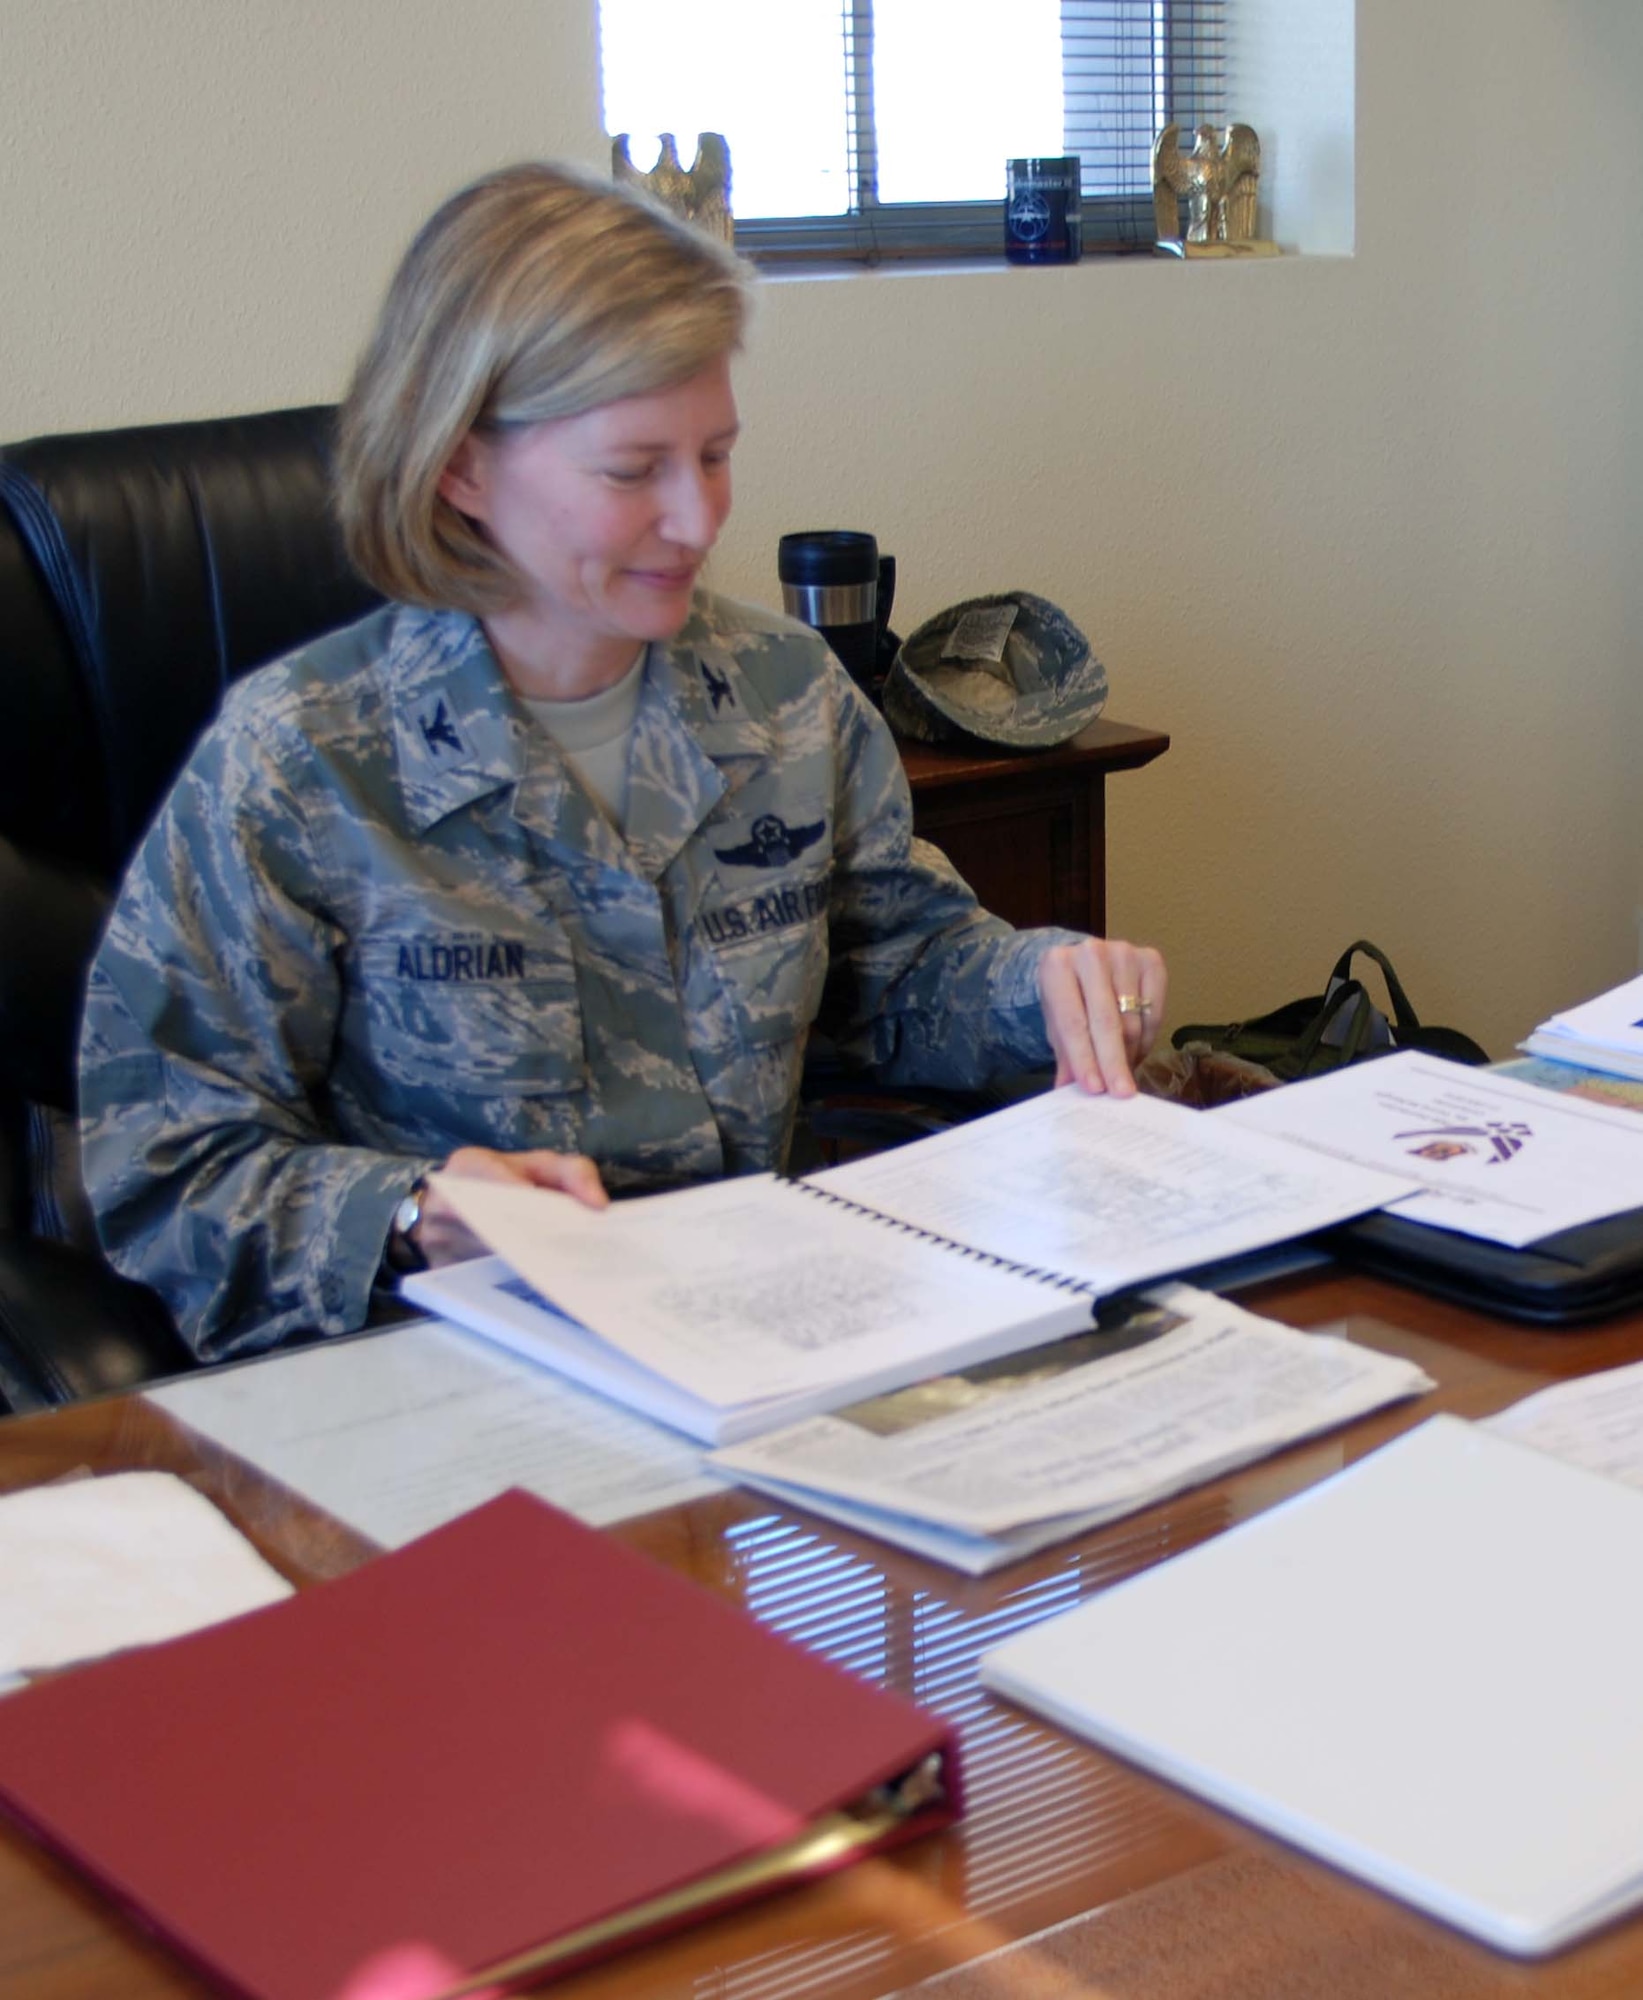 Col. Mary Aldrian, 452nd Air Mobility Wing vice commander, works at her desk in the wing headquarters building during the B UTA weekend, Jan. 24. (U.S. Air Force photo by Staff Sgt. Megan Crusher)